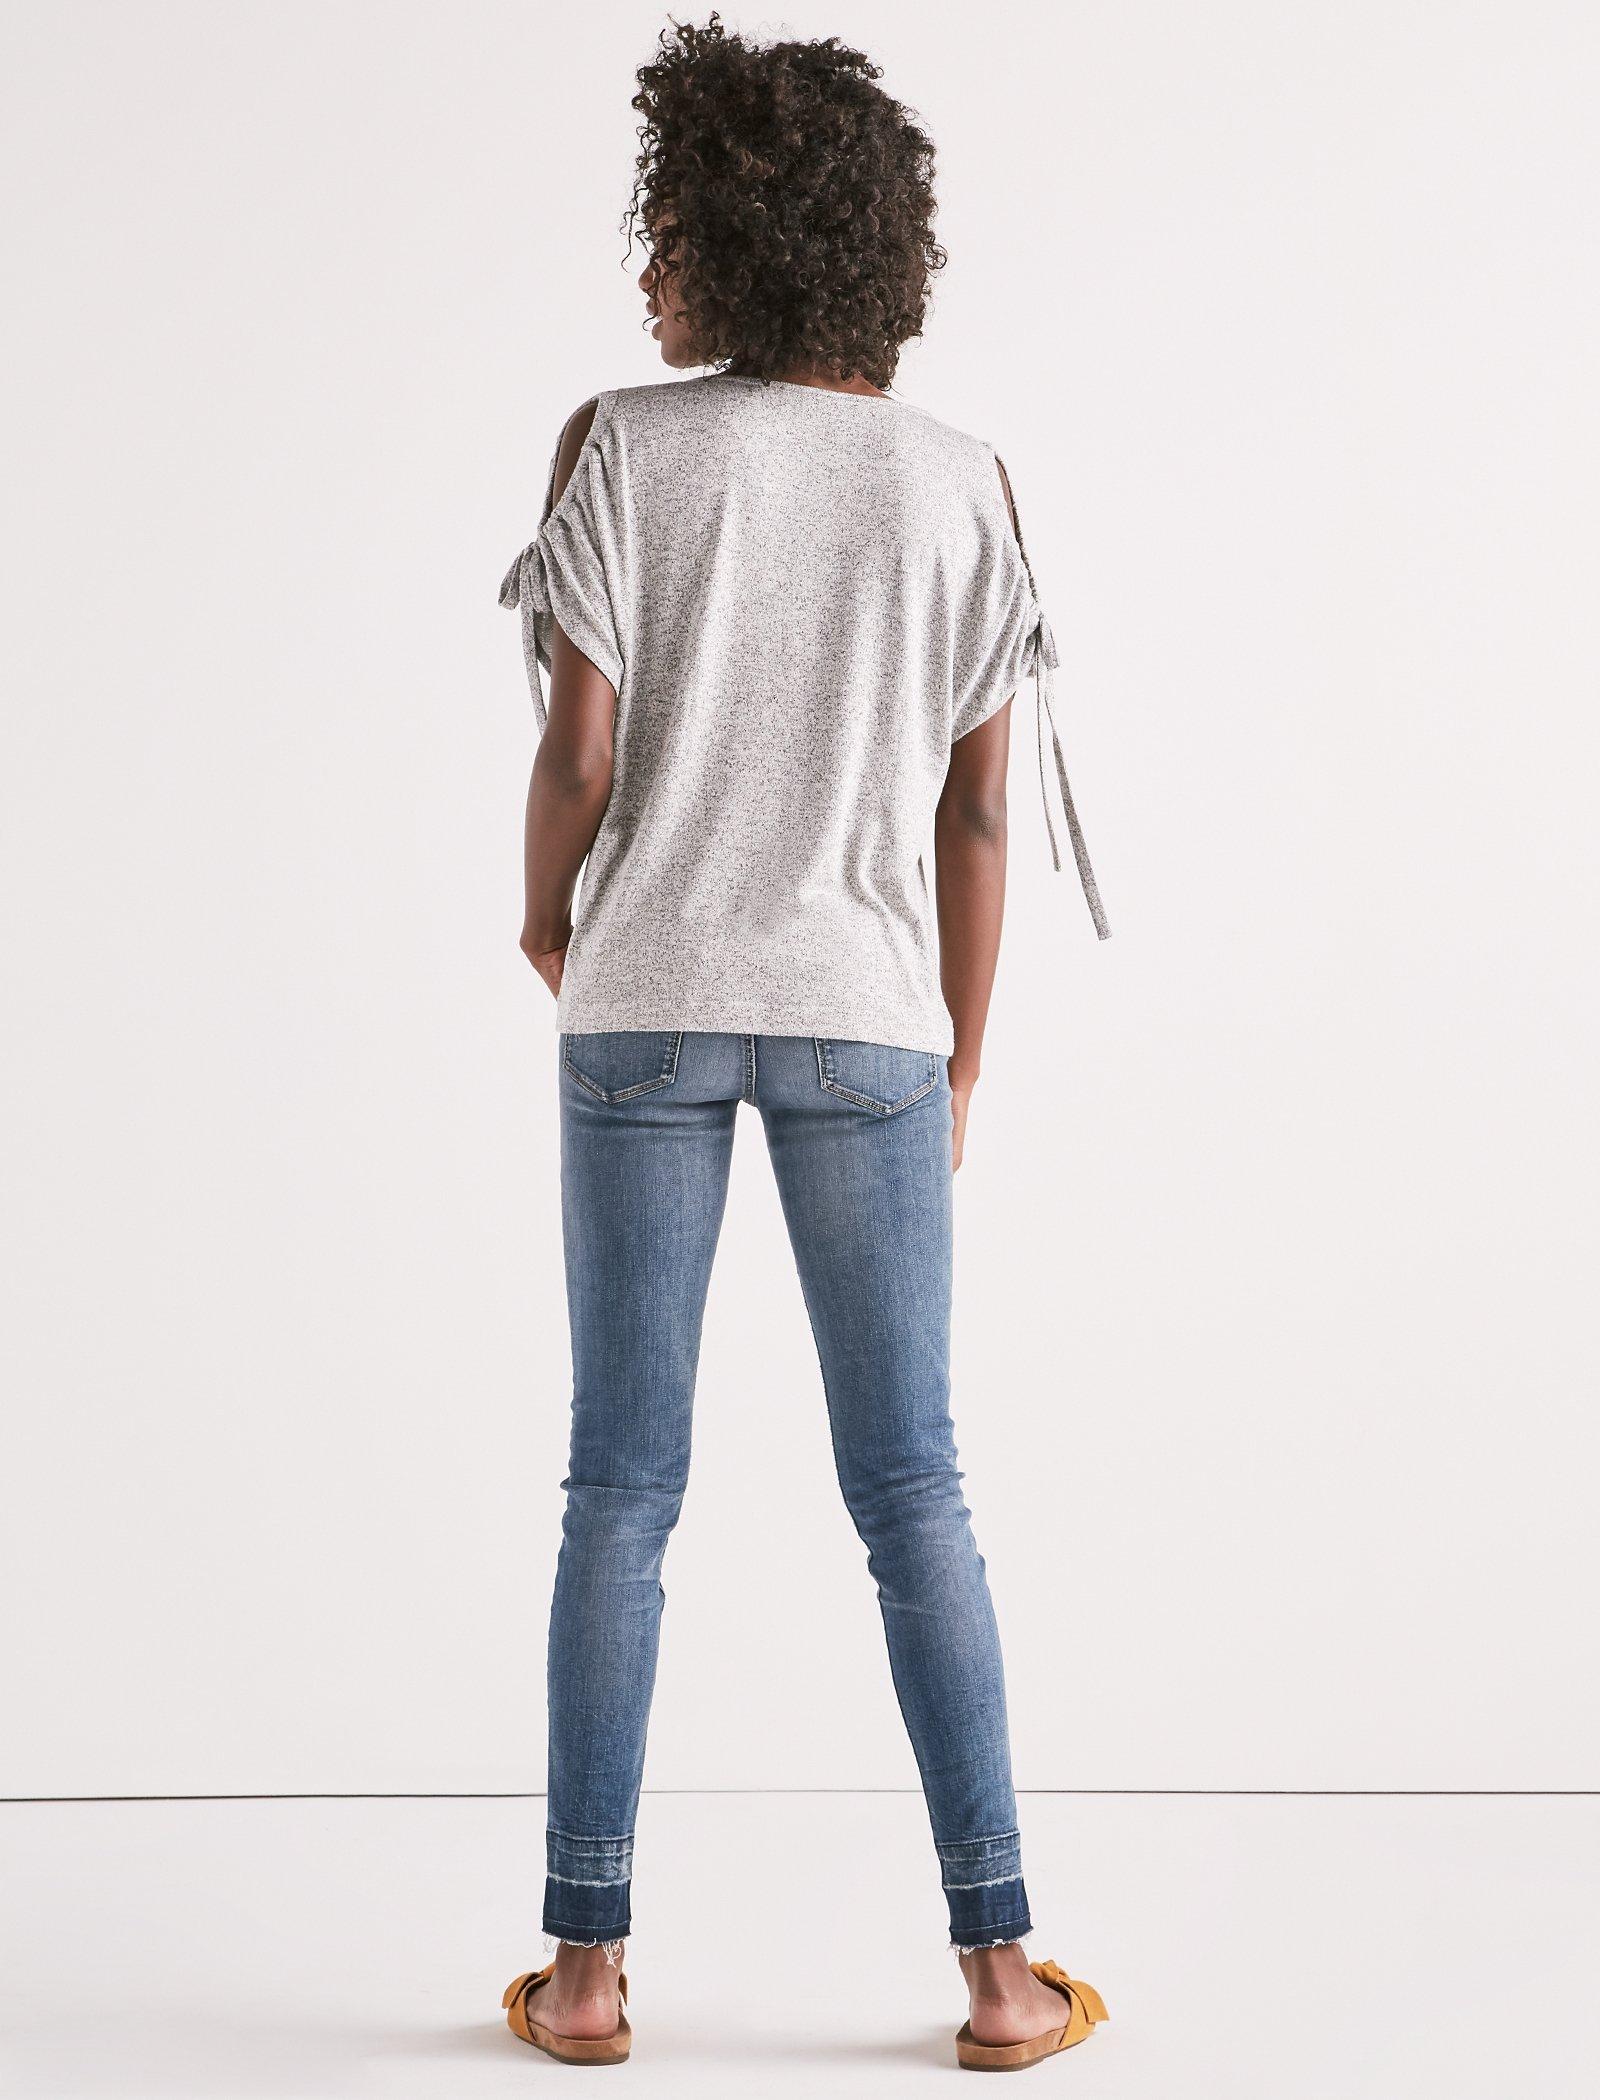 TIE SHOULDER BUTTON BACK | Lucky Brand